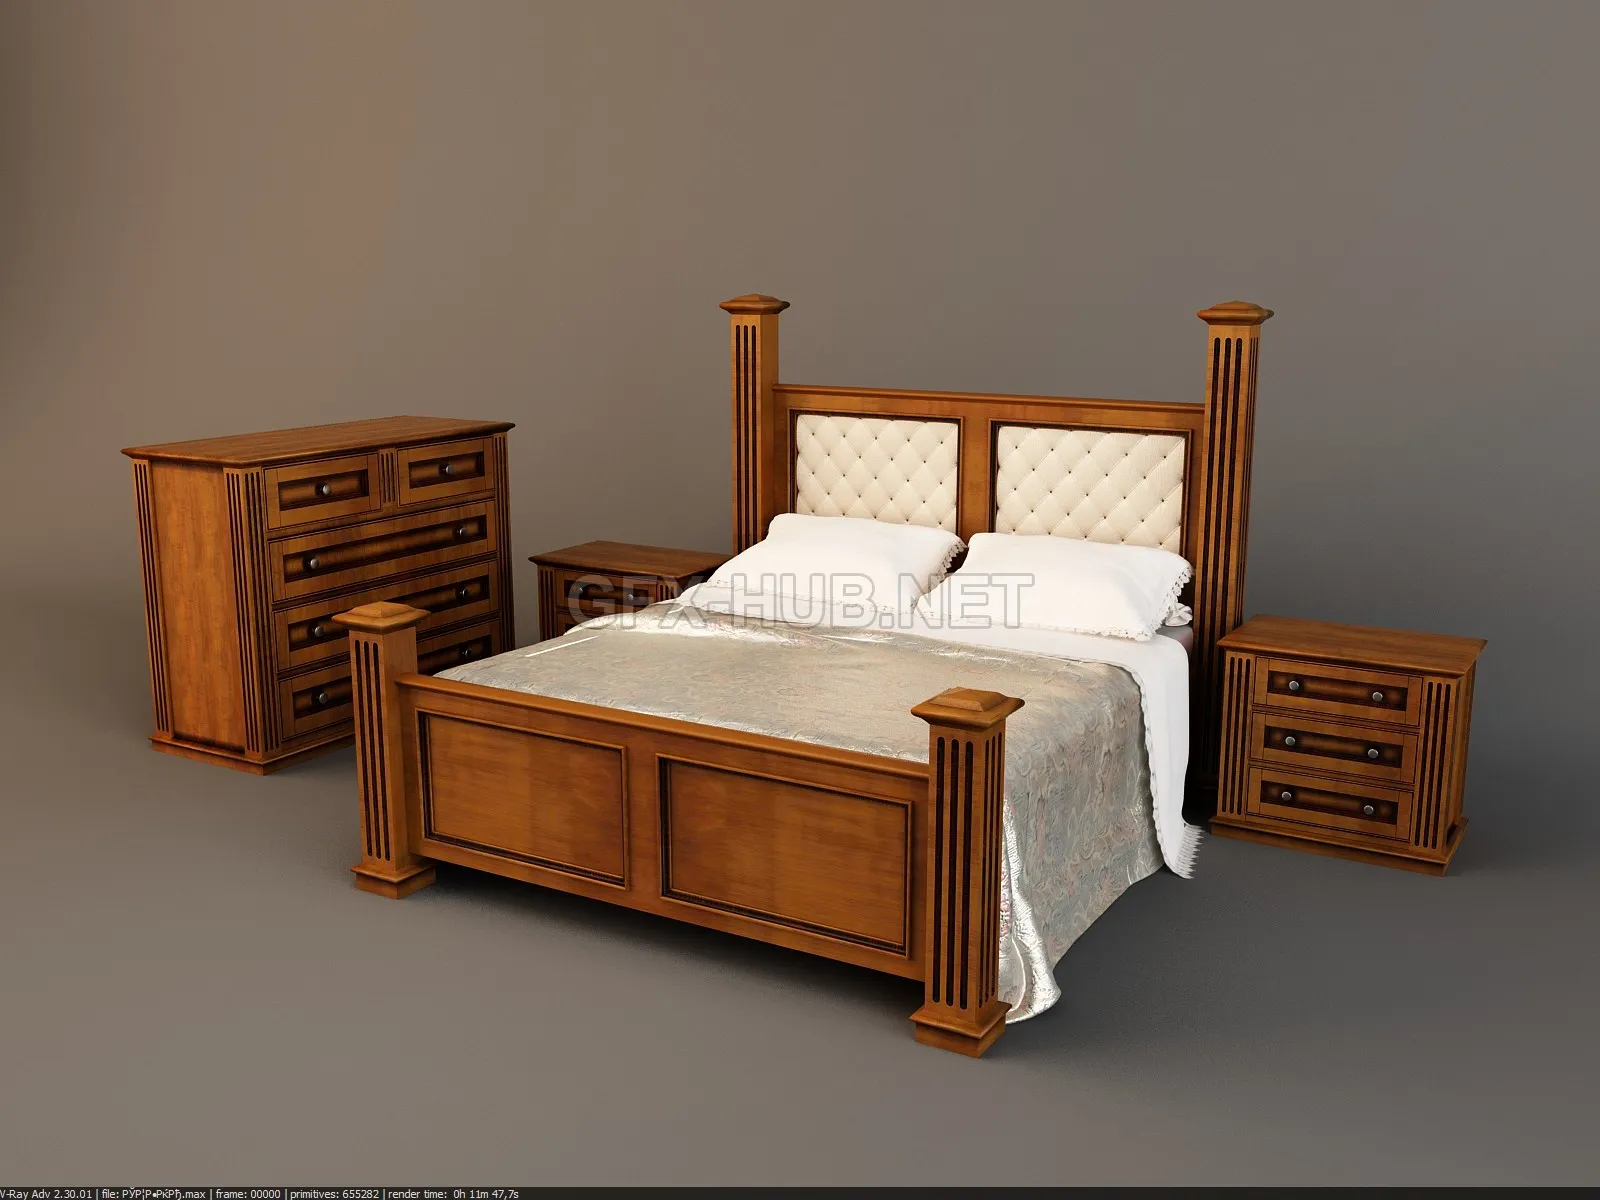 FURNITURE 3D MODELS – Bed and a set of nightstands